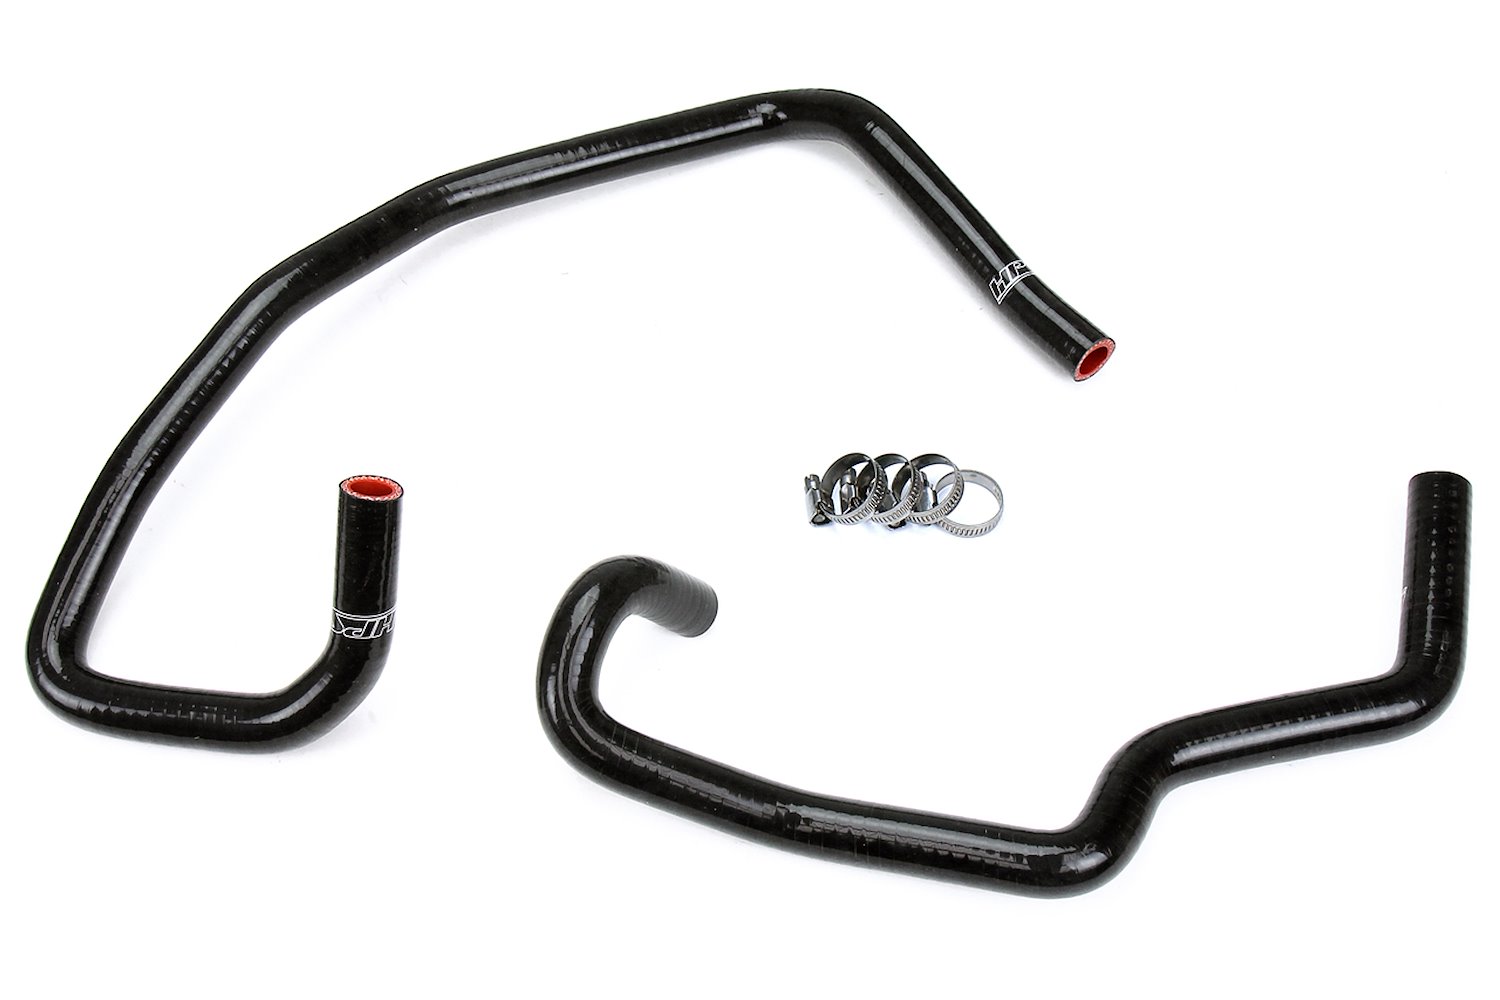 57-1785-BLK Heater Hose Kit, High-Temp 3-Ply Reinforced Silicone, Replace OEM Rubber Heater Coolant Hoses